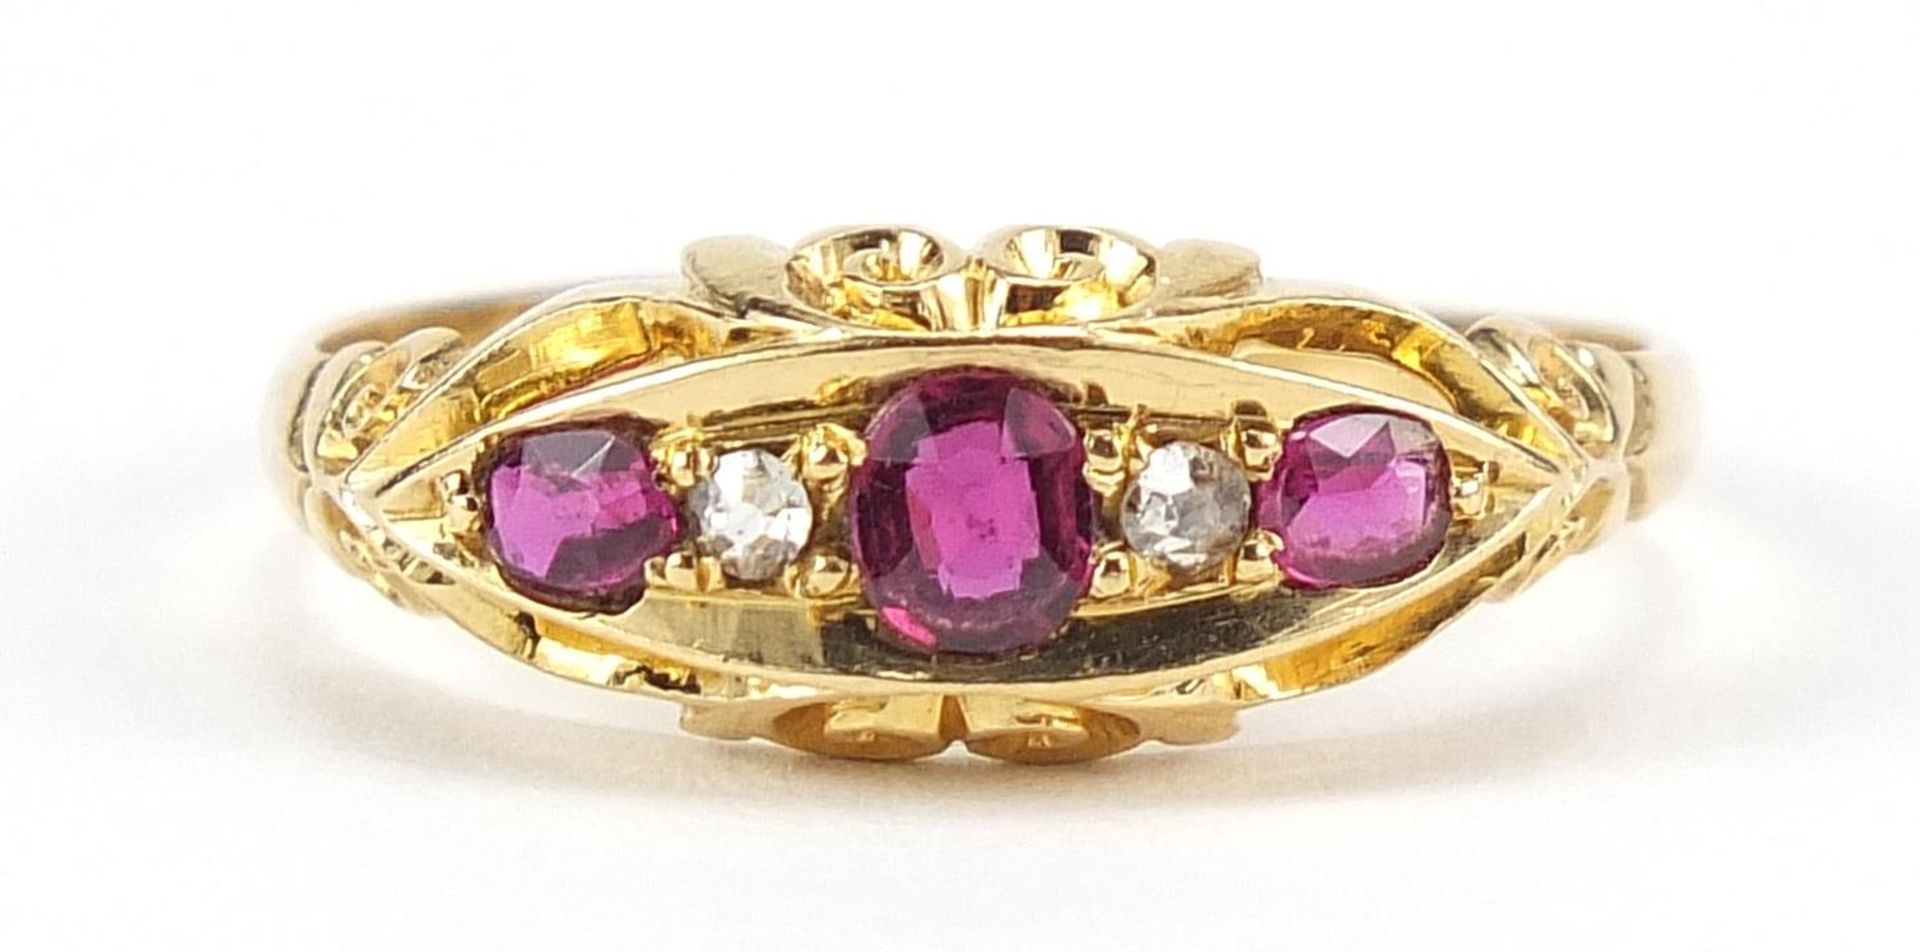 Antique 18ct gold ruby and diamond five stone ring with ornate setting, size P, 2.6g